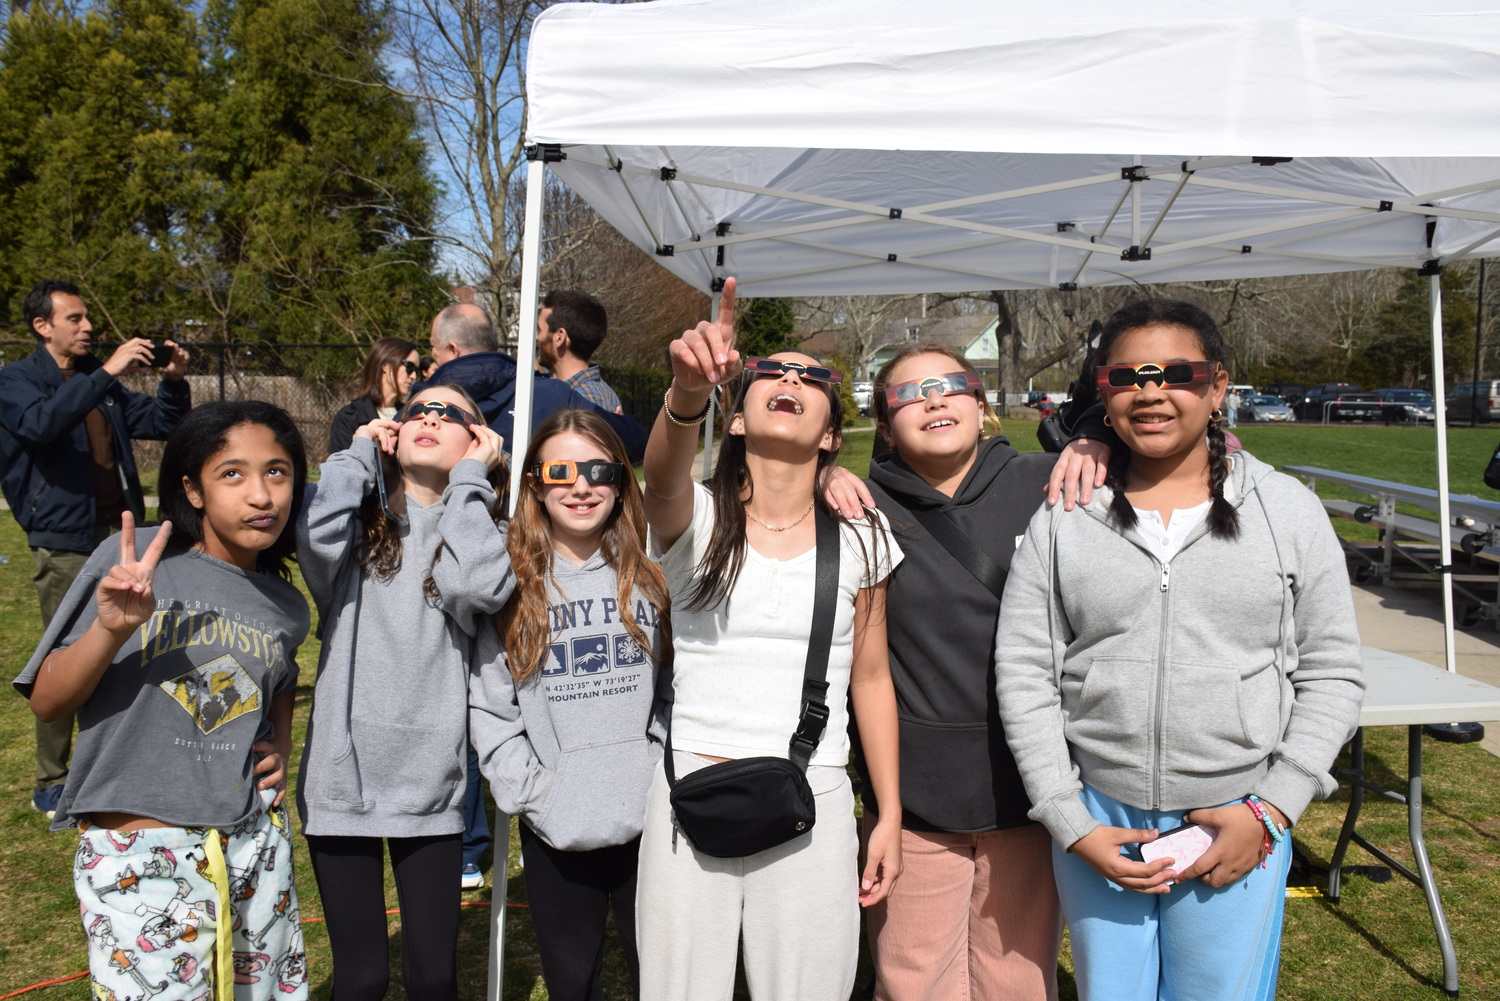 The April 8 solar eclipse, which stretched across North America, provided Pierson High and Middle school students the opportunity to see the spectacular event as a community. Immediately after school, students, faculty and parents gathered on the Pierson back field with eclipse viewing glasses in hand. From about 2:50-4:30 p.m., students played outdoor games such as basketball, soccer and frisbee, stopping on occasion to look up and view the eclipse with their glasses. Also available was a live viewing station complete with a telescope that fed to a desktop computer screen, which showed the eclipse clearly without having to look up through the tinted glasses. Food was available for everyone to enjoy and Two Shoes, a band run by two Pierson teachers, played music that featured the occasional student guest appearance. COURTESY SAG HARBOR SCHOOL DISTRICT